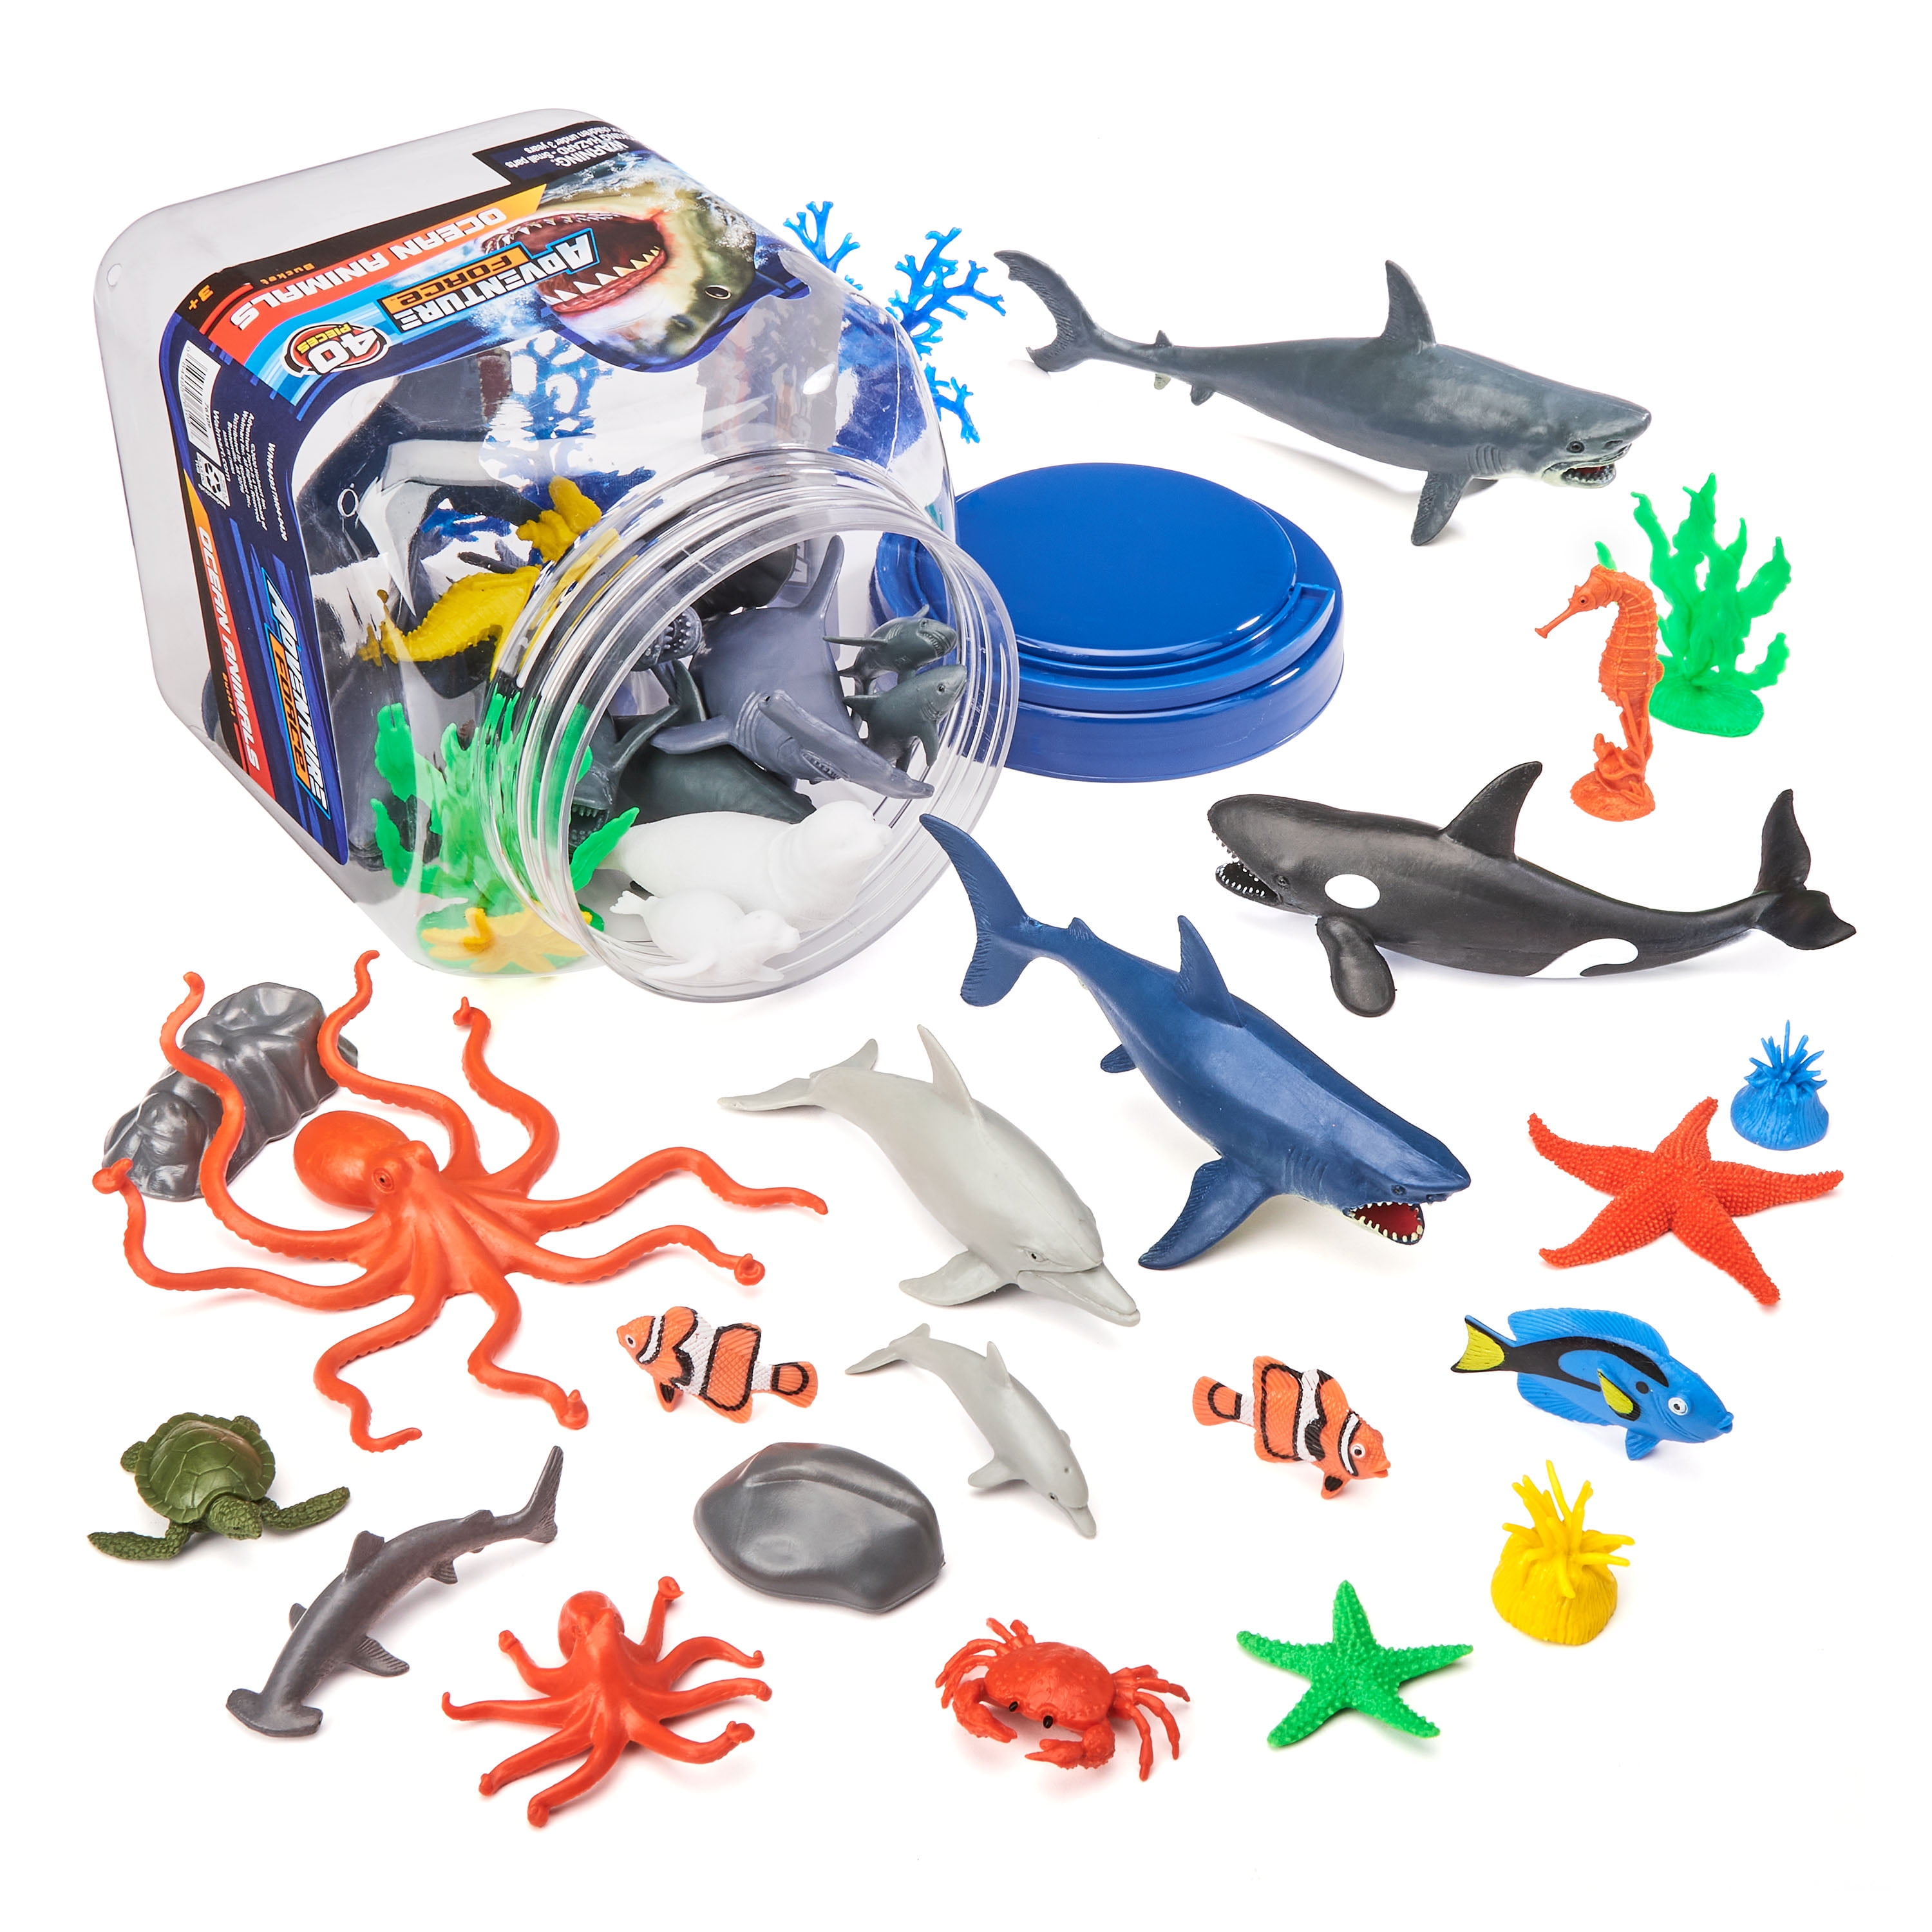 Adventure Force Sea Animals & Dinosaurs 8pc Toy Sets 